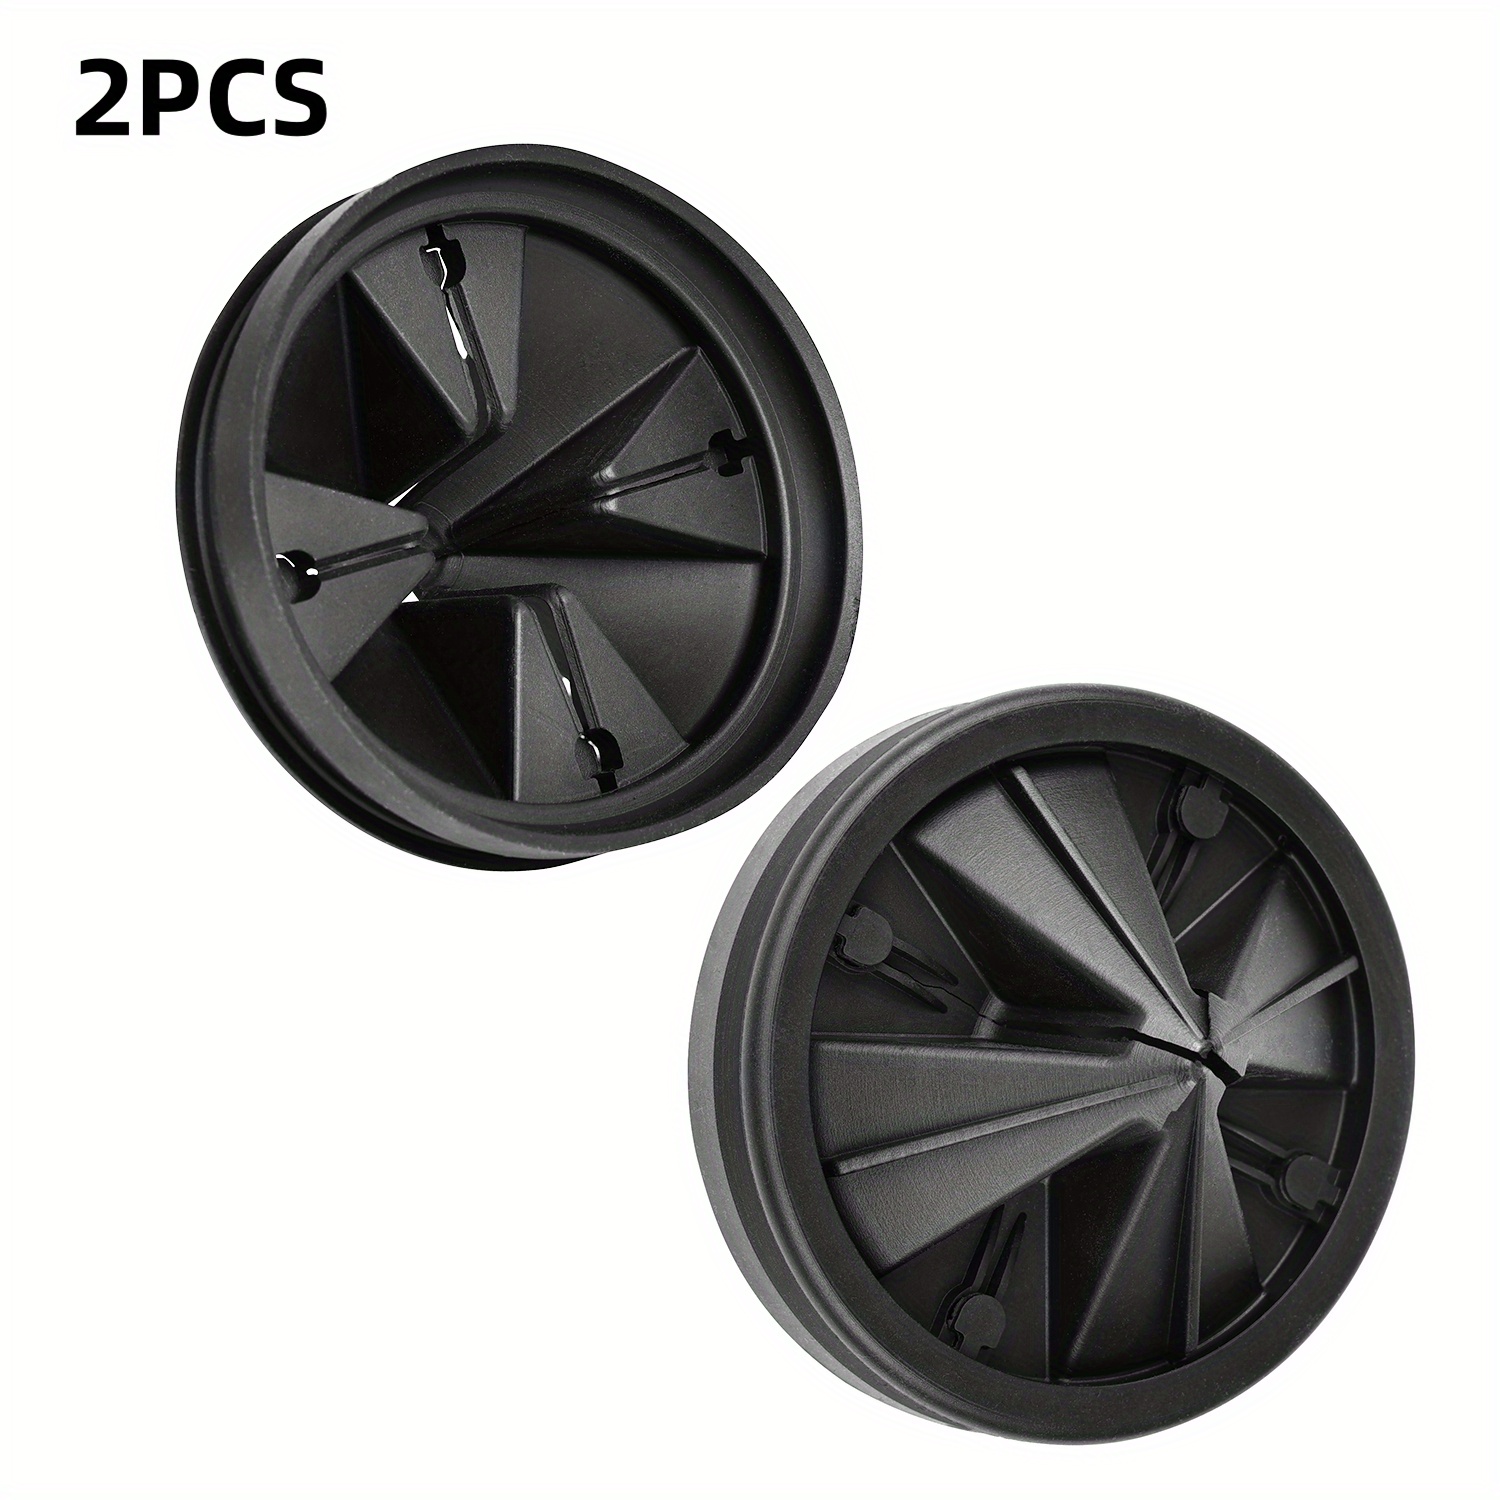 Garbage Disposal Guard Sink Baffle Rubber Drain Cover , 2pcs, Outer Diameter: 87mm, Size: 230 cm